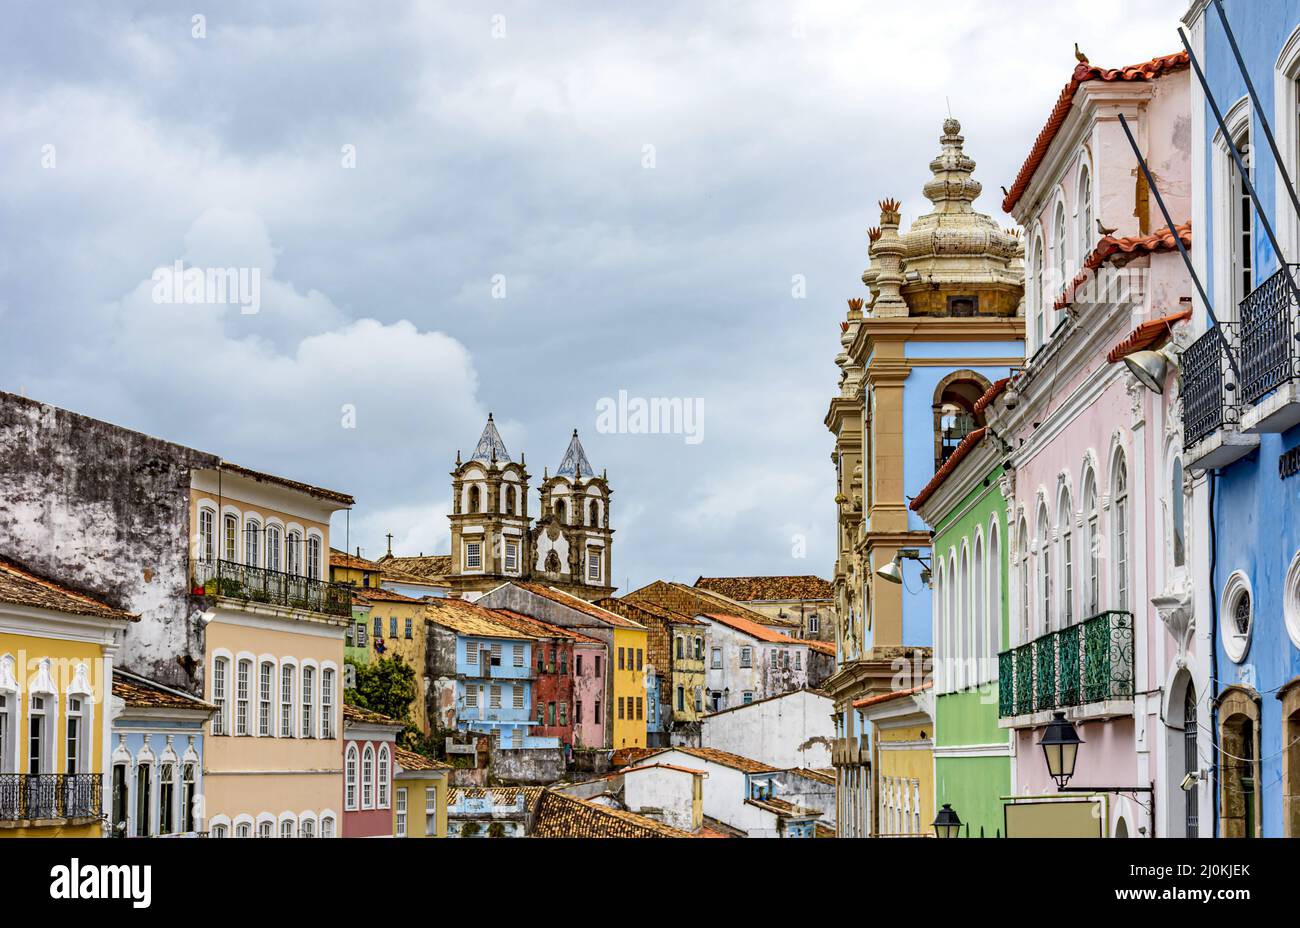 Colorful historical colonial houses facades and church towers in baroque and colonial style Stock Photo